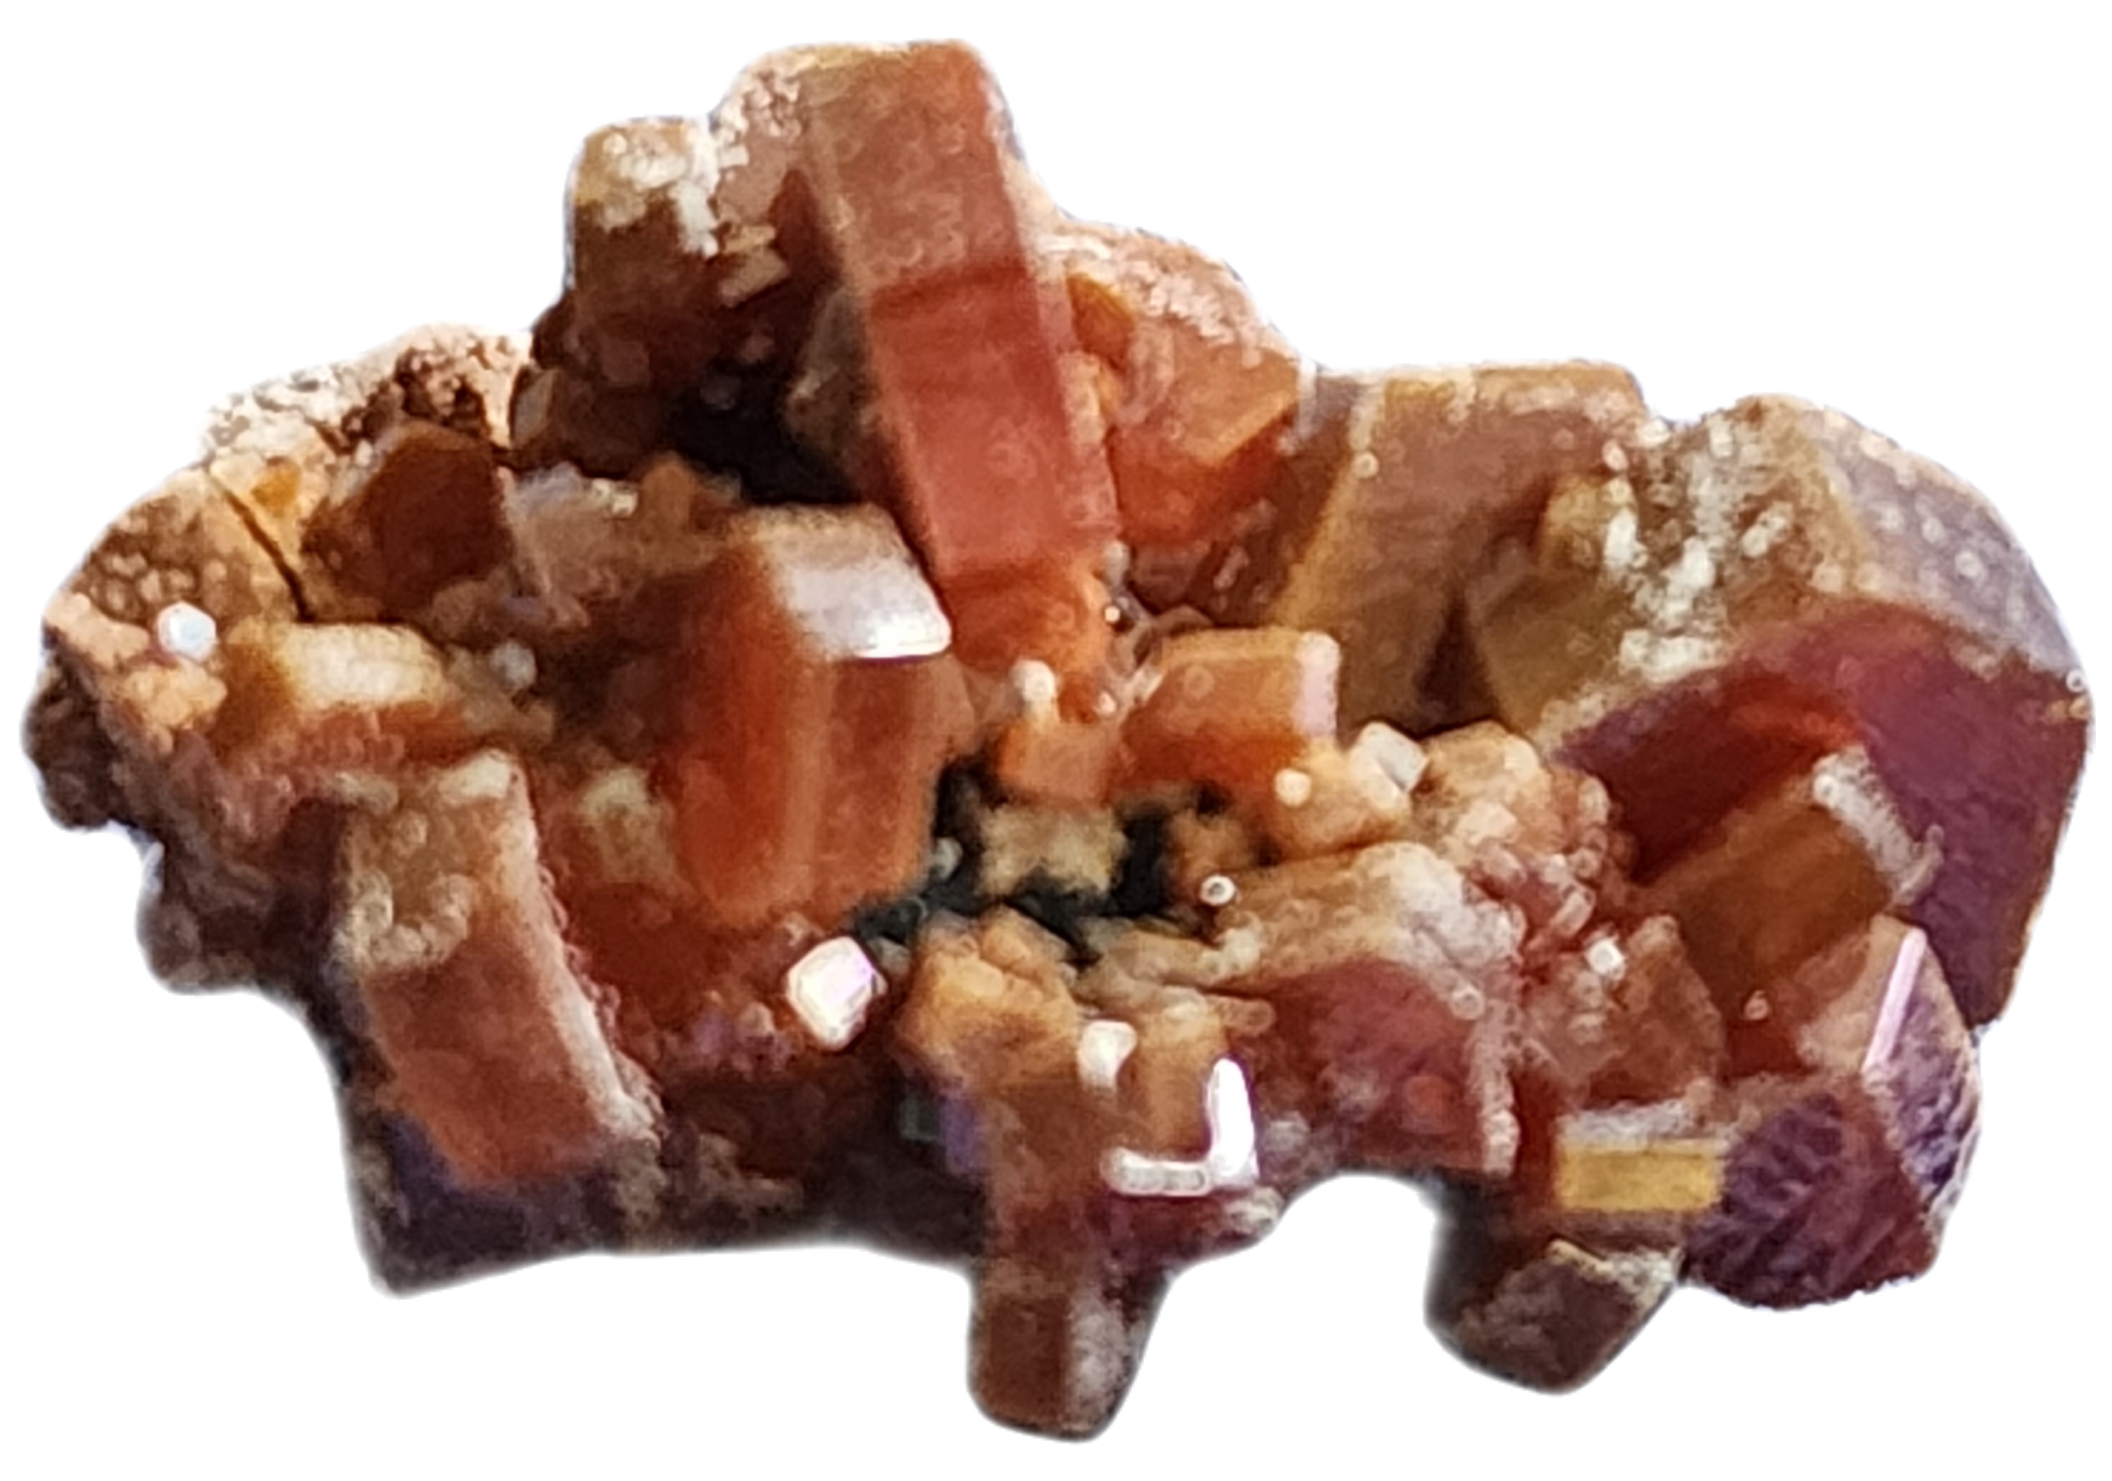 Rare Vanadinite Clusters with Strong Energy